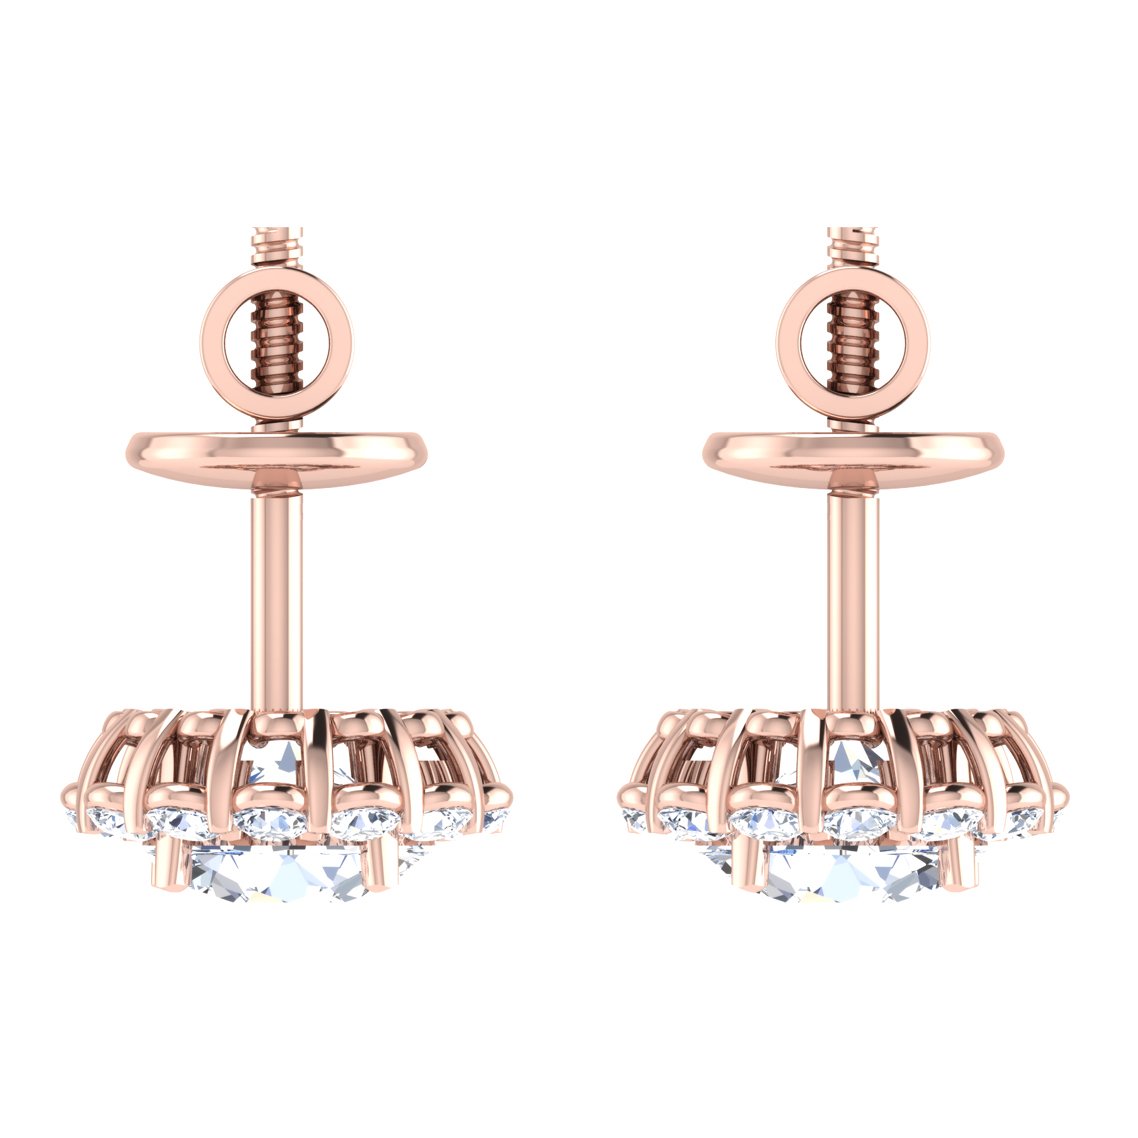 Priceless Floral Diamond Earring In Pure Gold By Dhanji Jewels